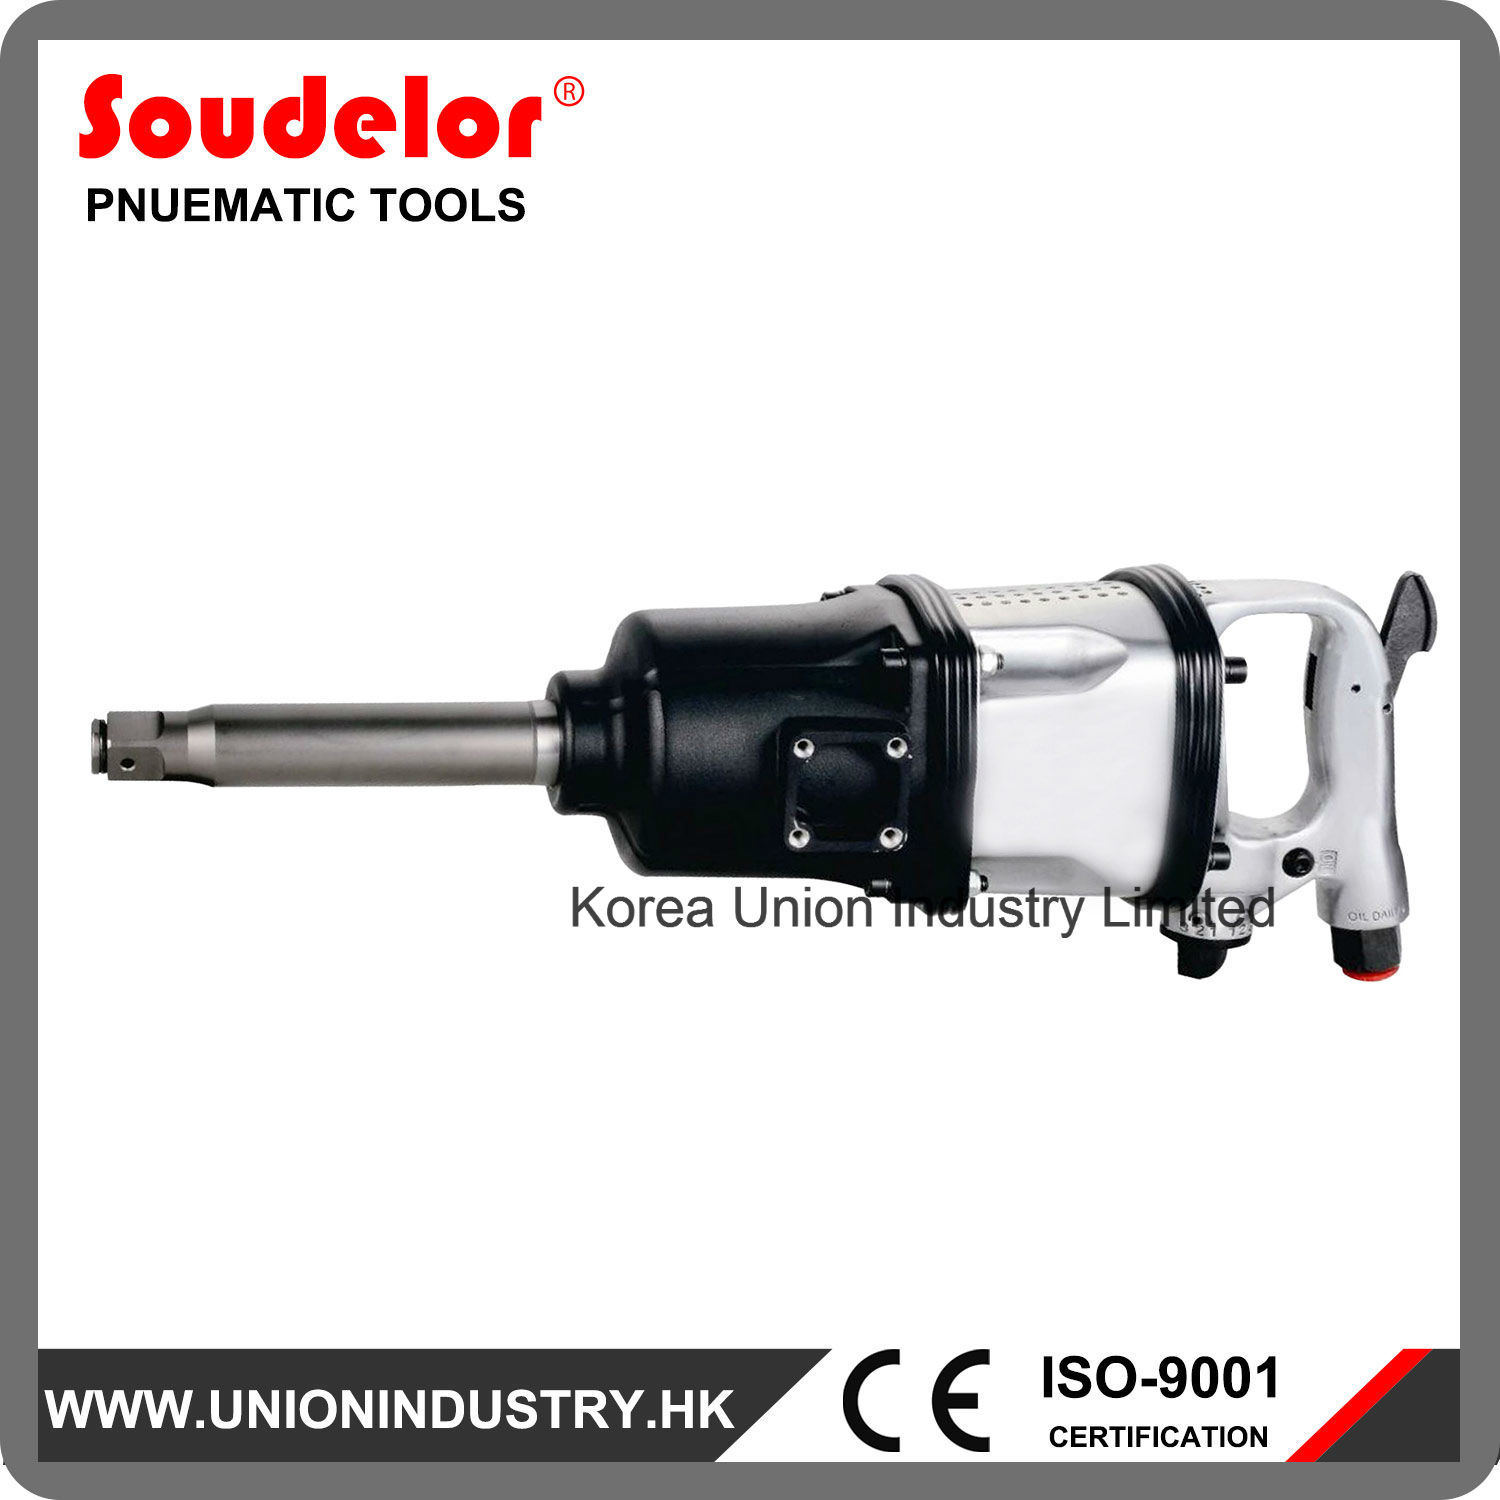 1 Inch Pneumatic Tool Industrial Quality Snap on Impact Wrench Ui-1208